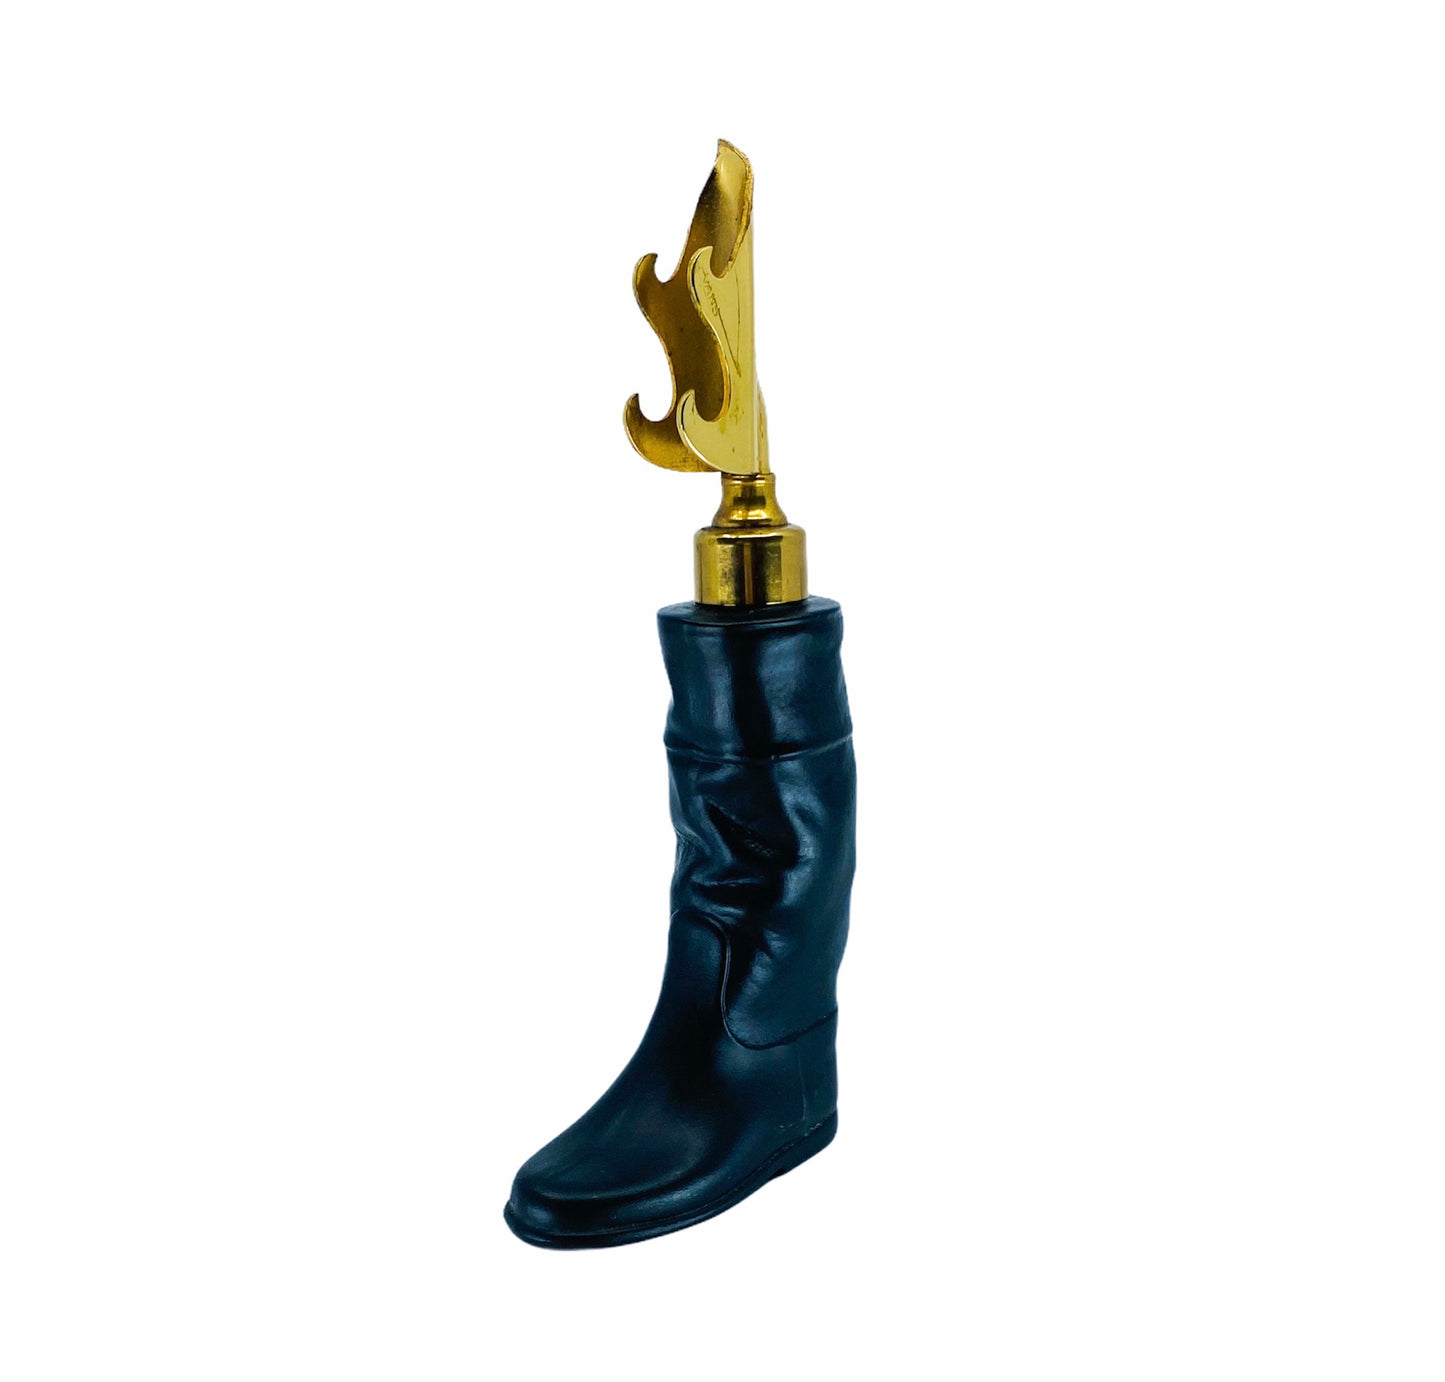 1990s Riding Boot Bottle Opener by Evans